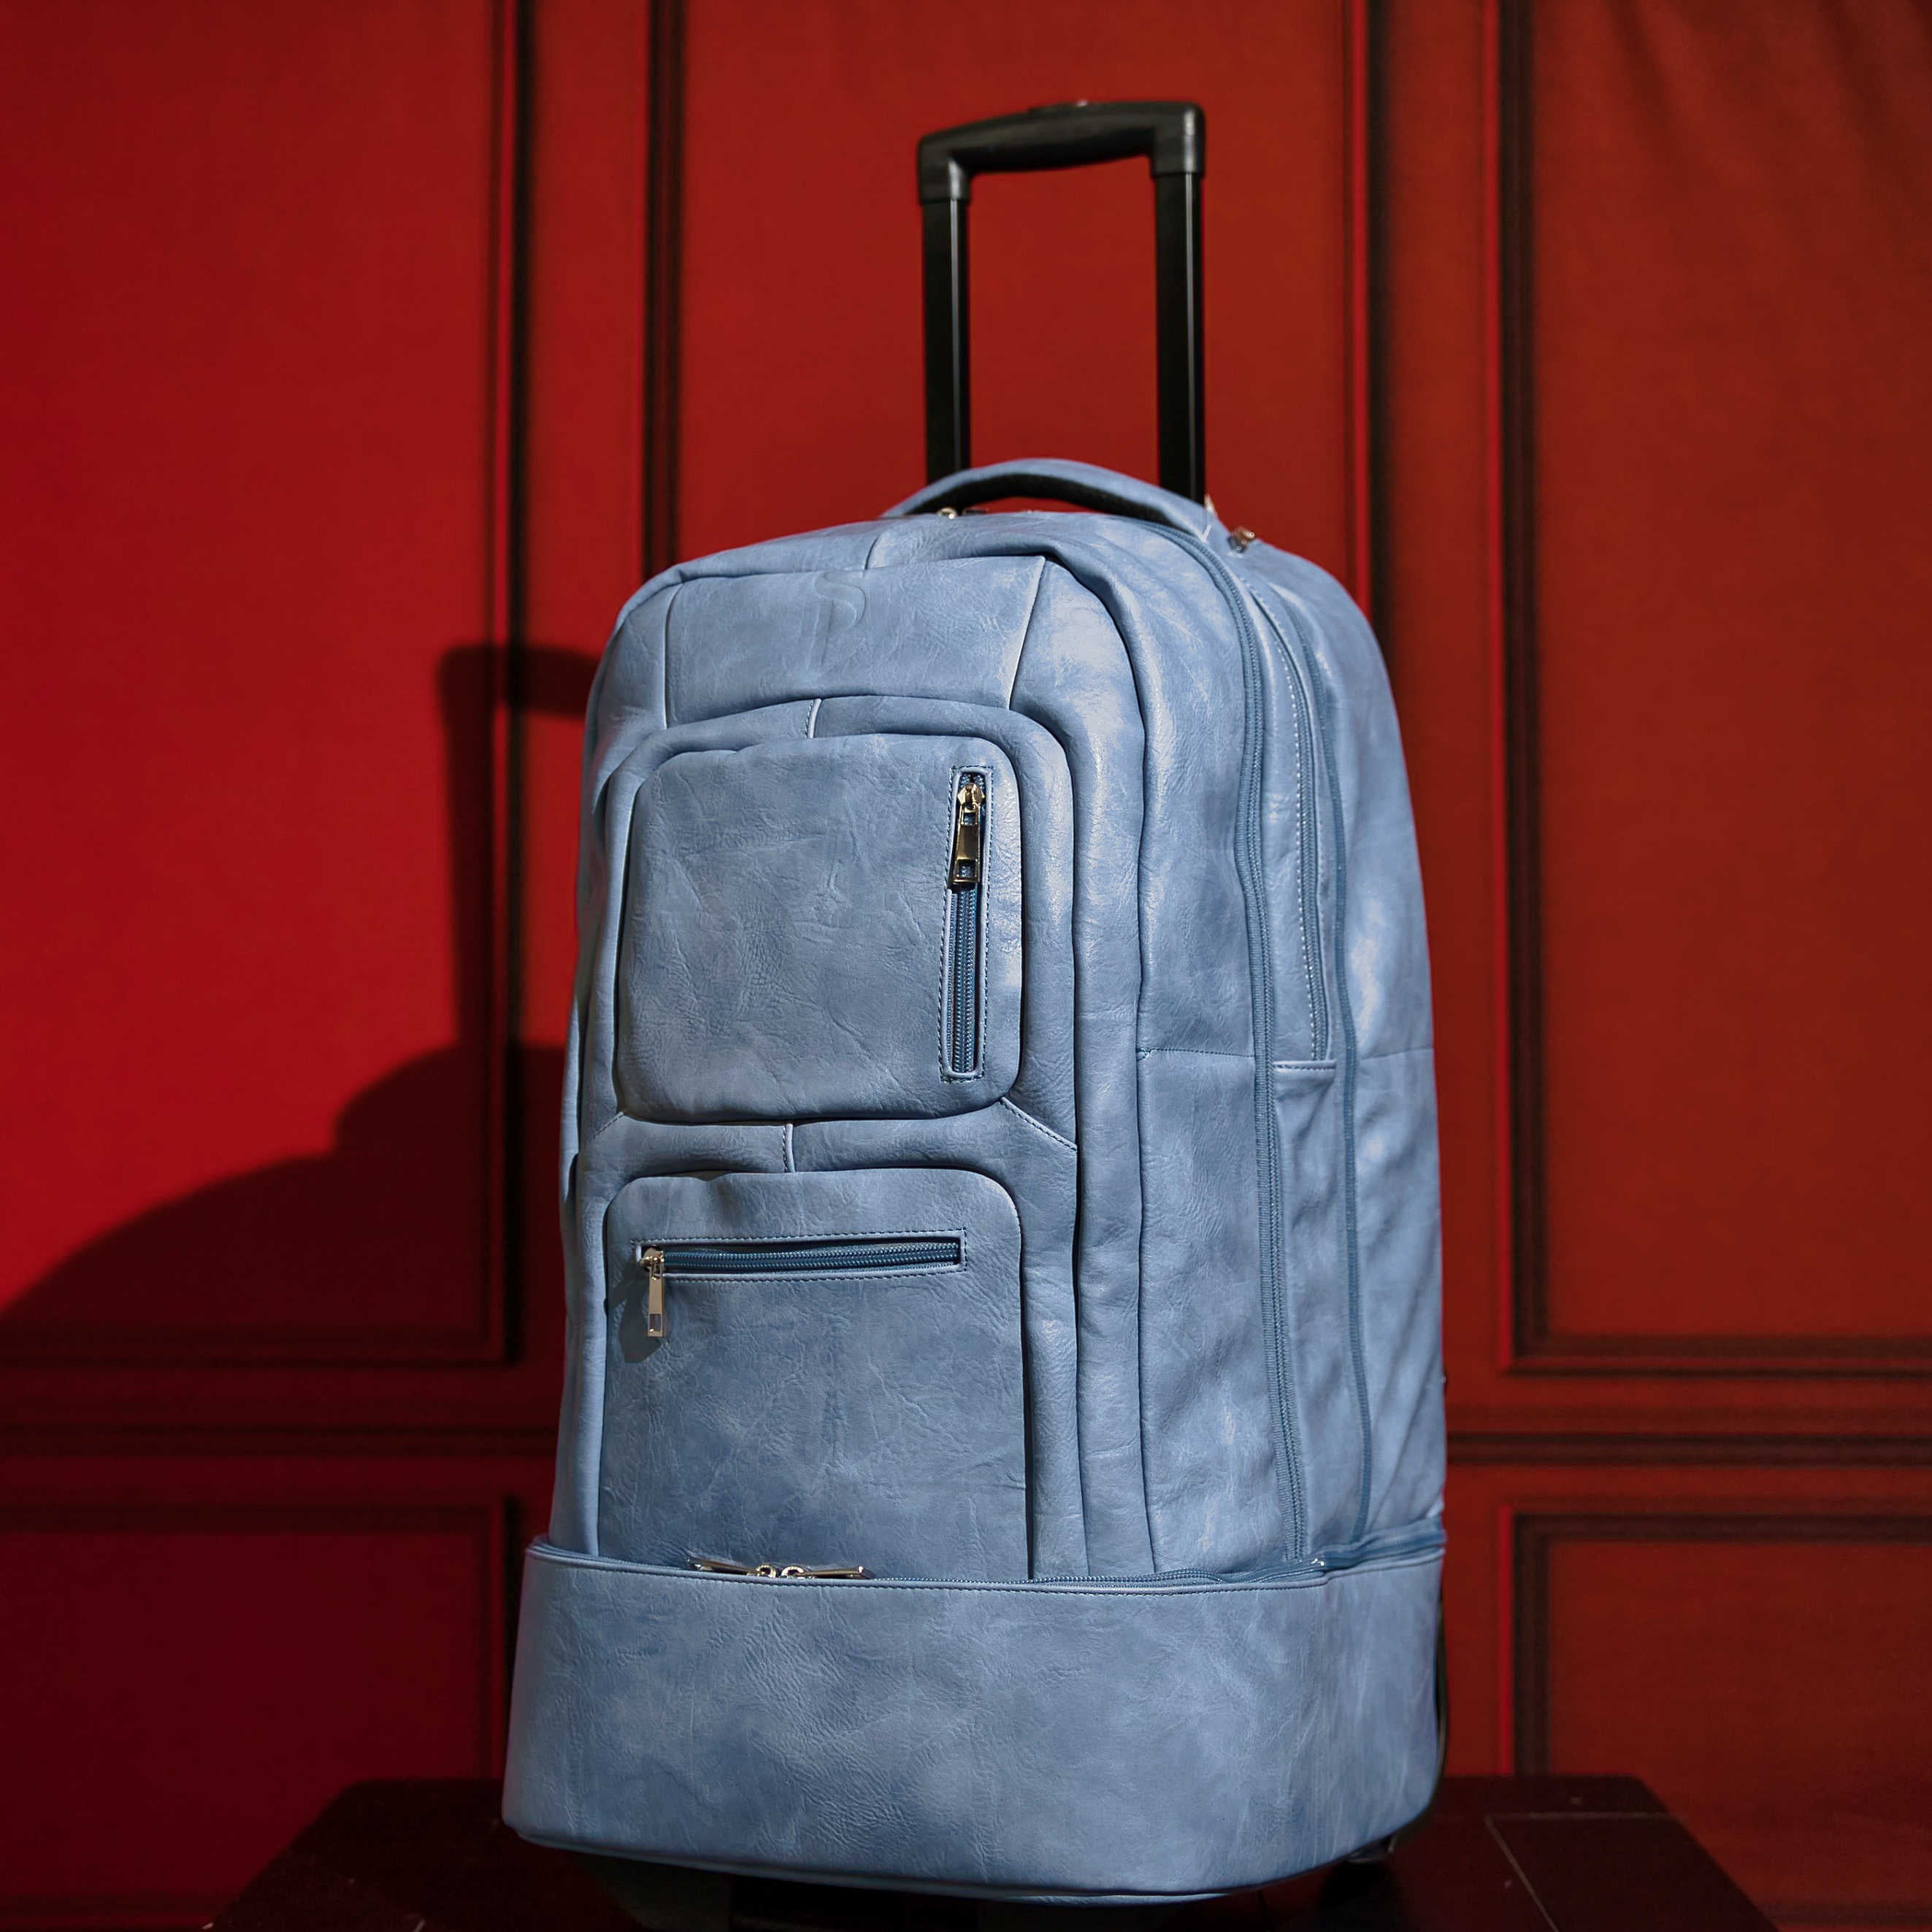 Baby Blue Tumbled Leather Roller Bag (Only 200 Made) - Sole Premise